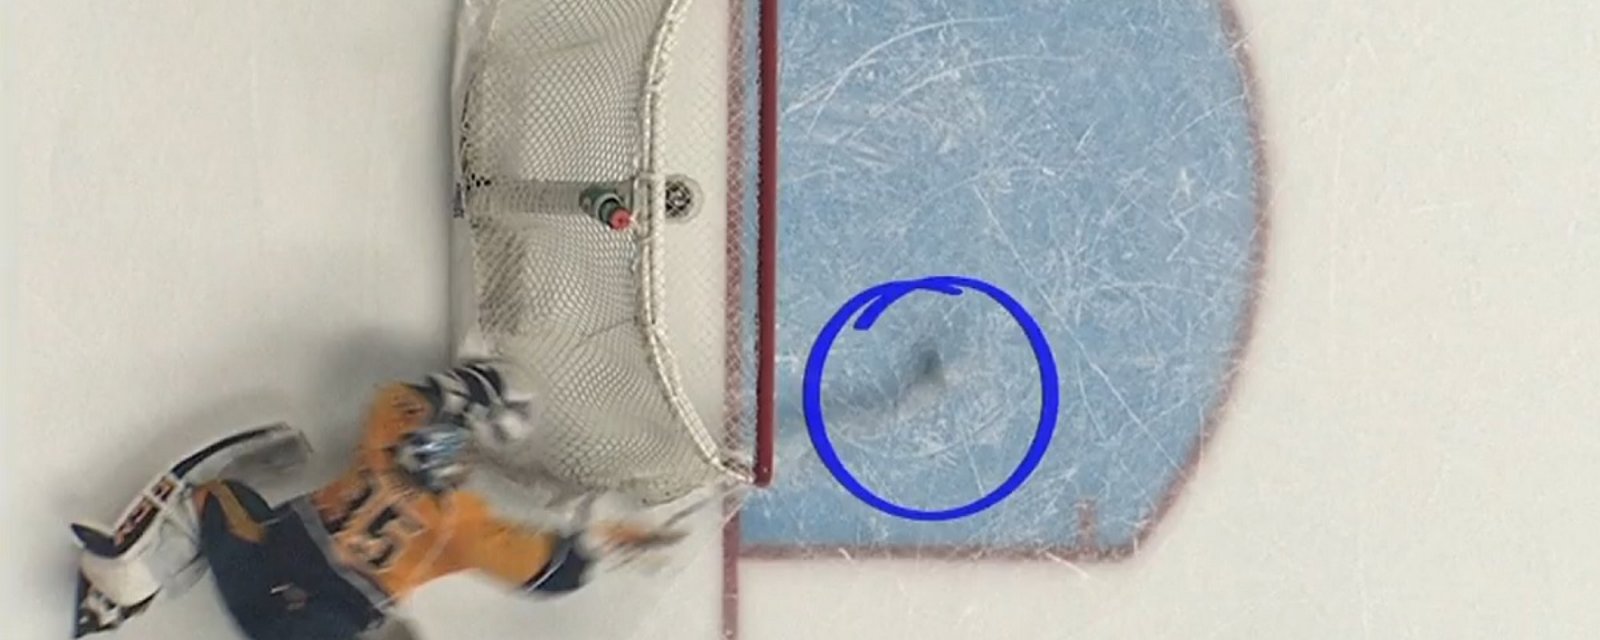 Pekka Rinne makes a mind-blowing save to keep Chicago off the scoreboard.